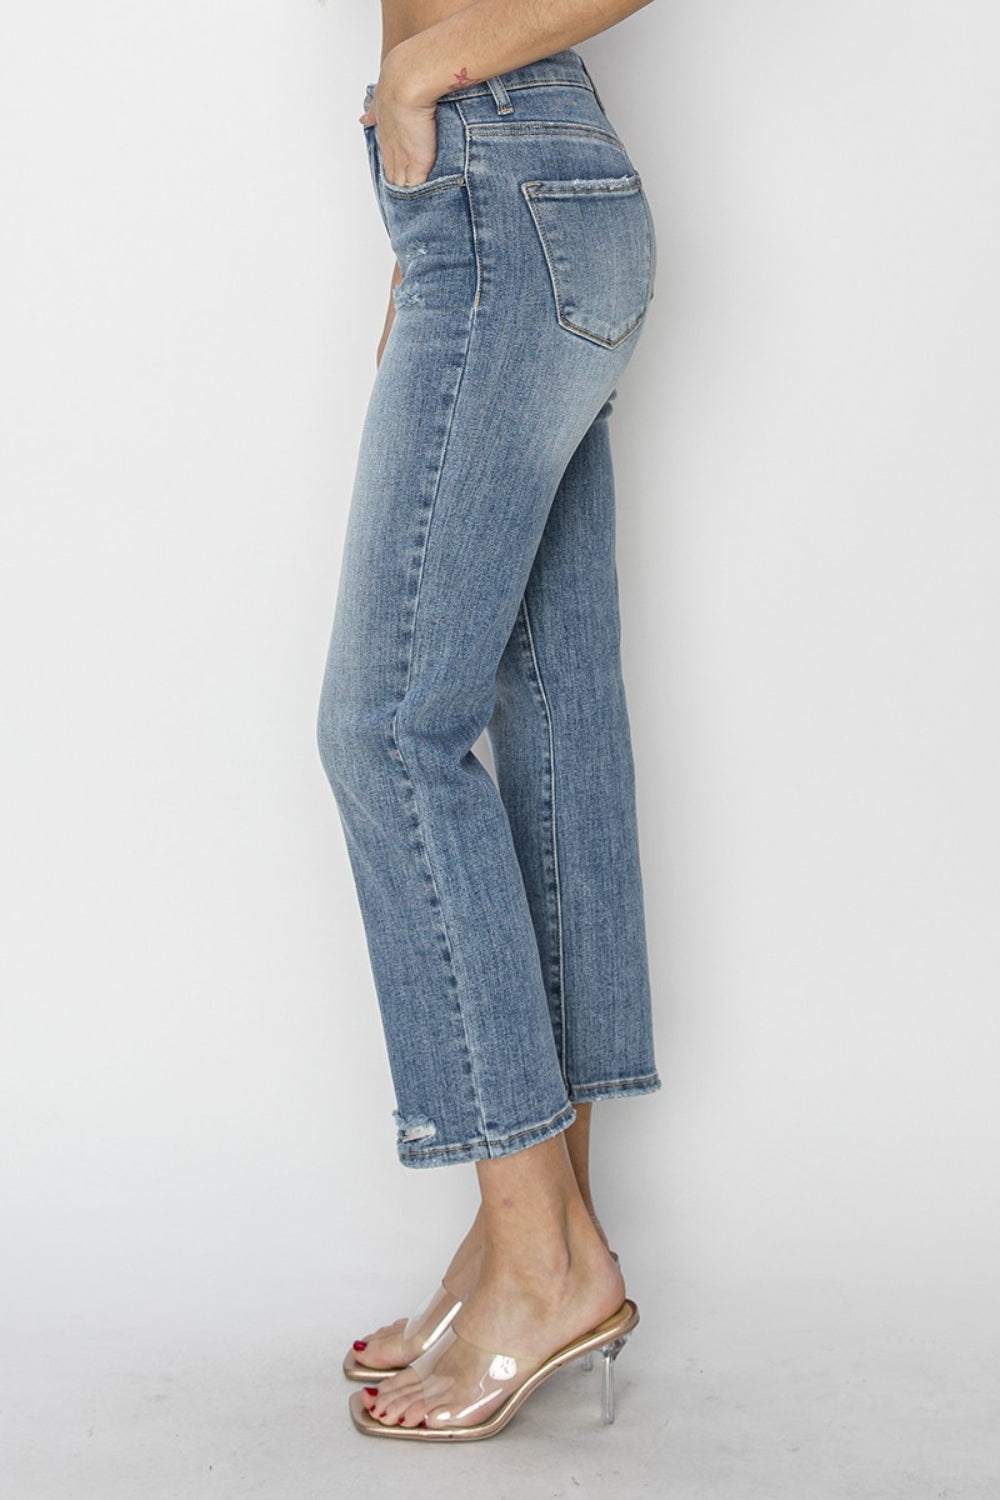 RISEN Whitney Cropped Jeans